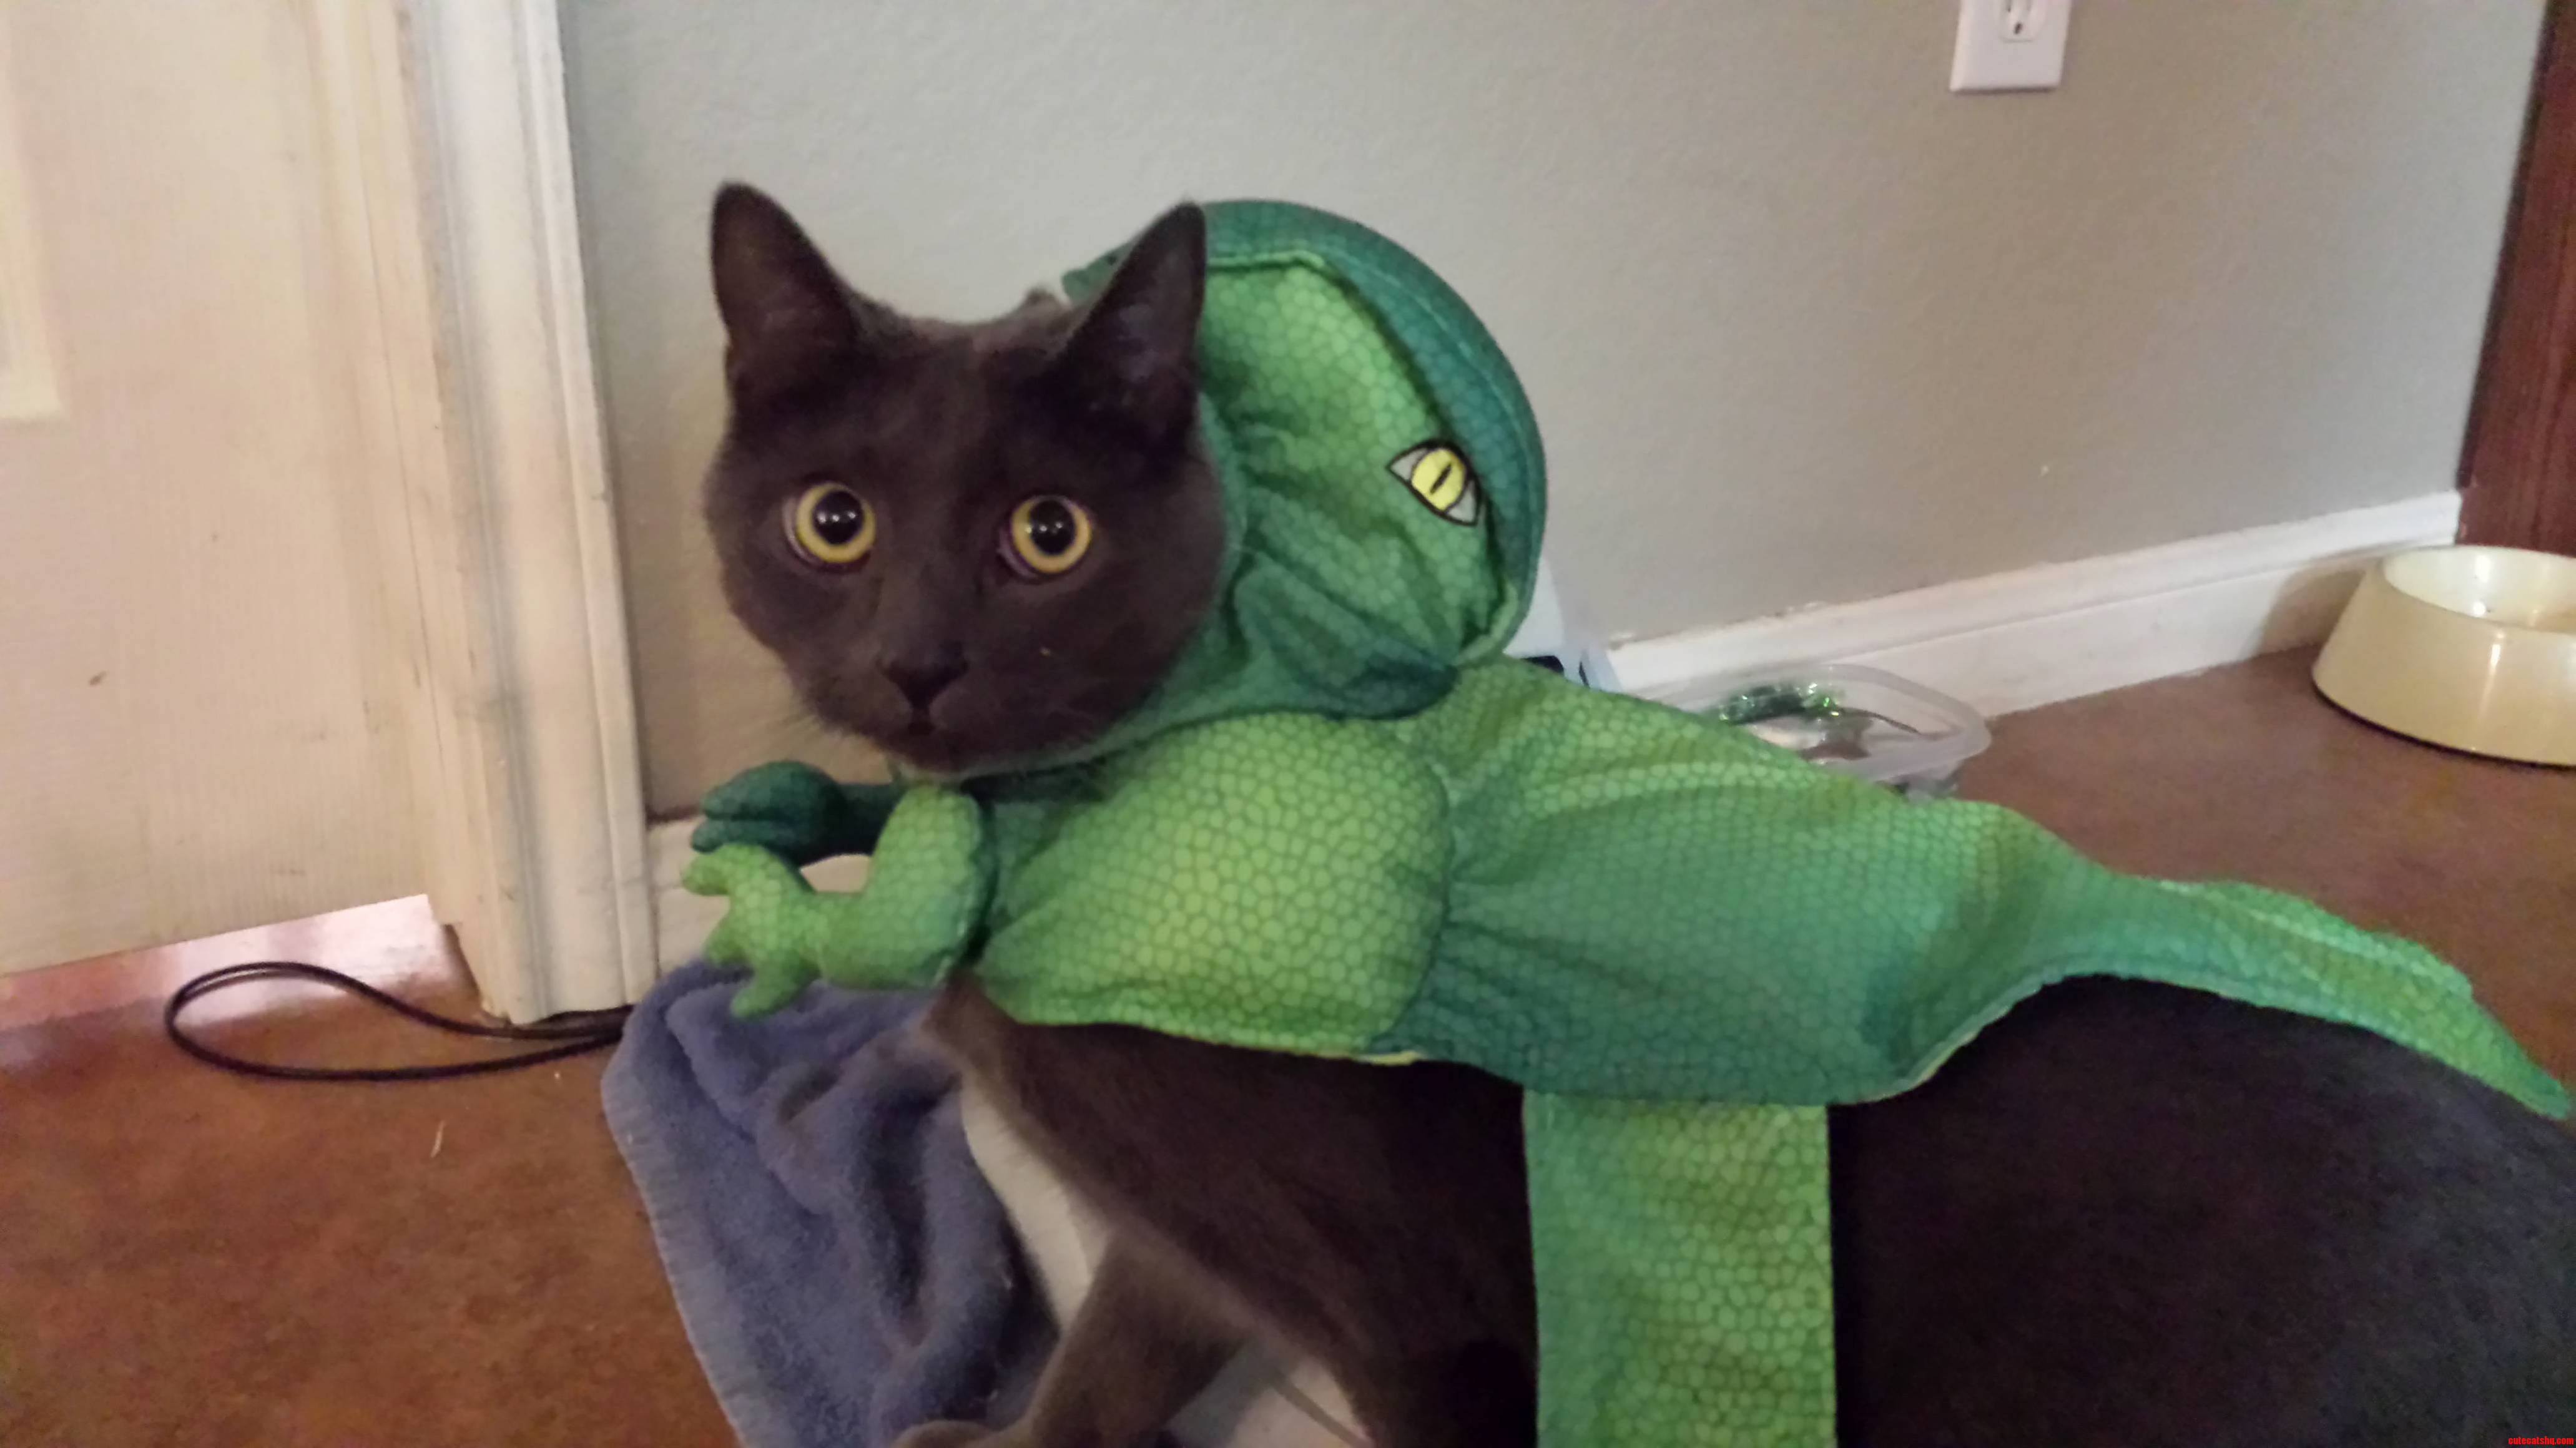 He Does Not Like His Costume